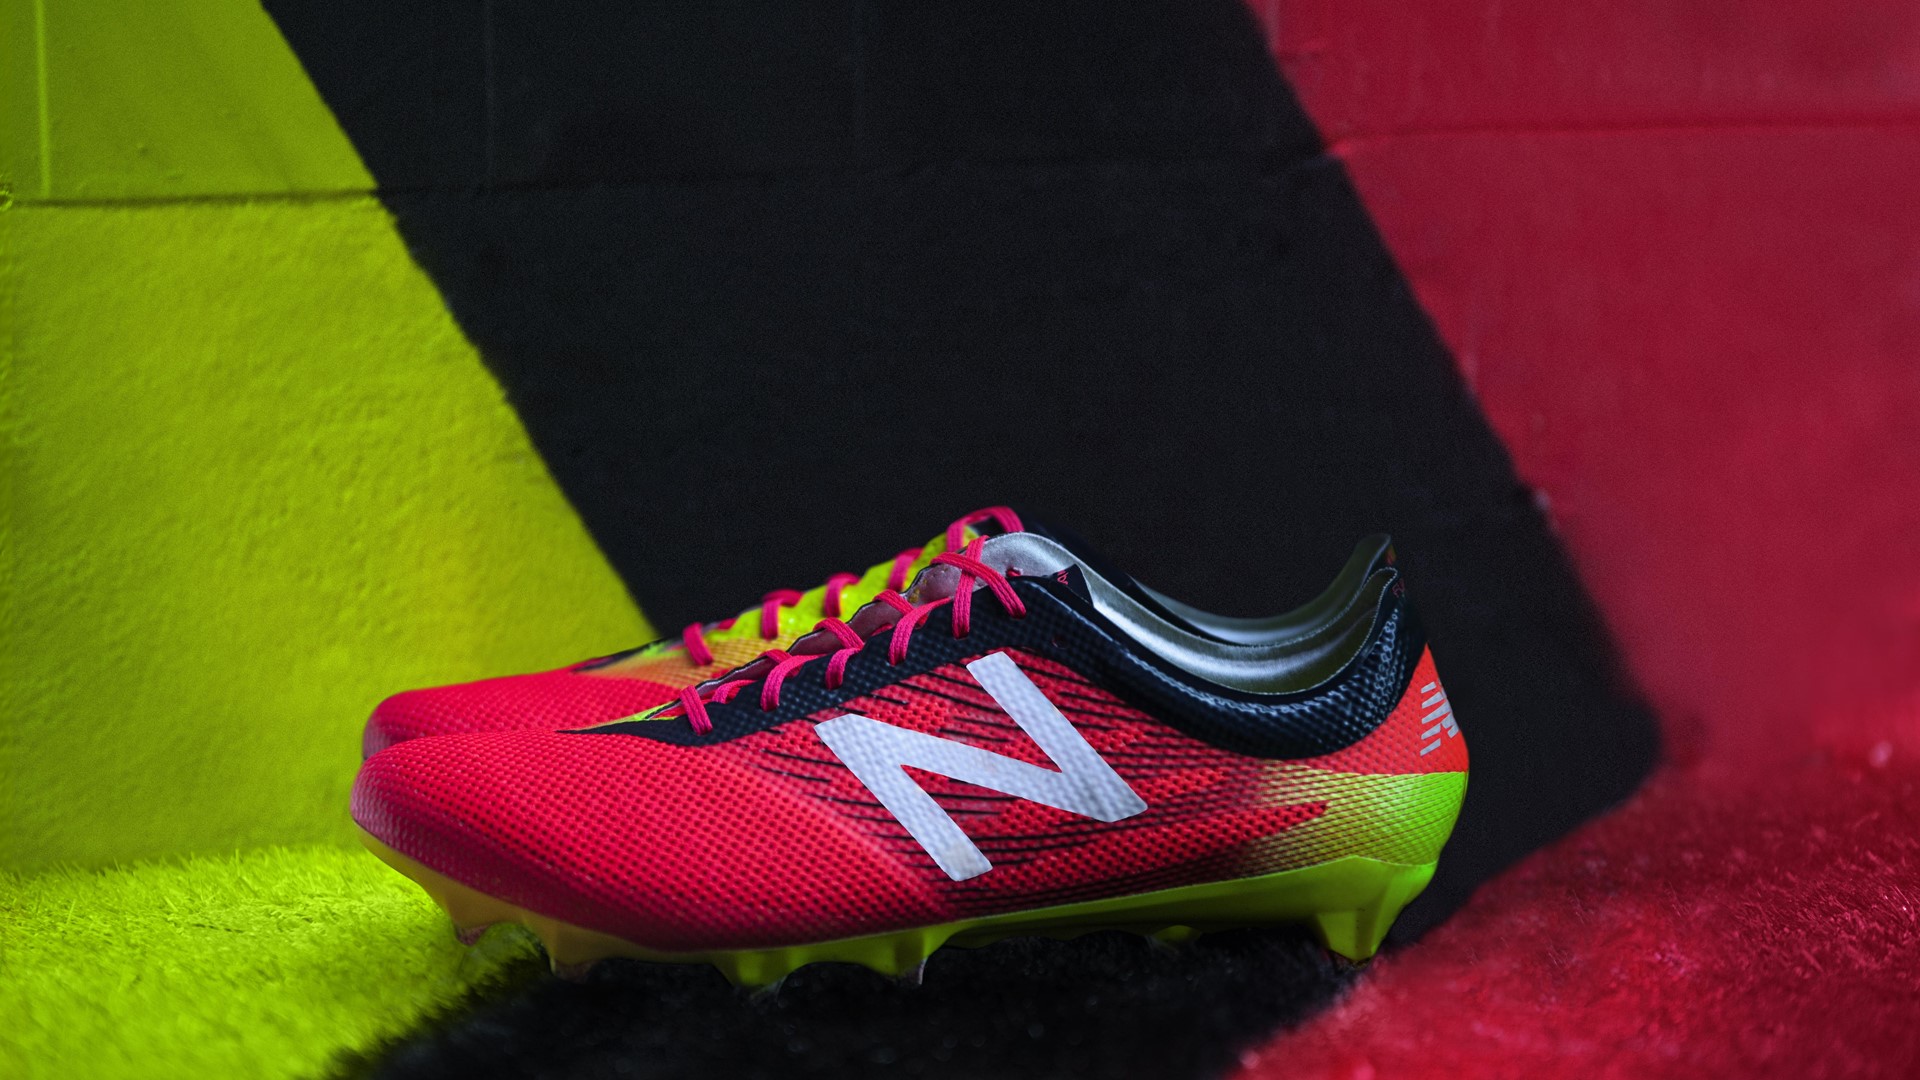 New Balance Soccer - Furon 2.0 - Launches June 6, 2016